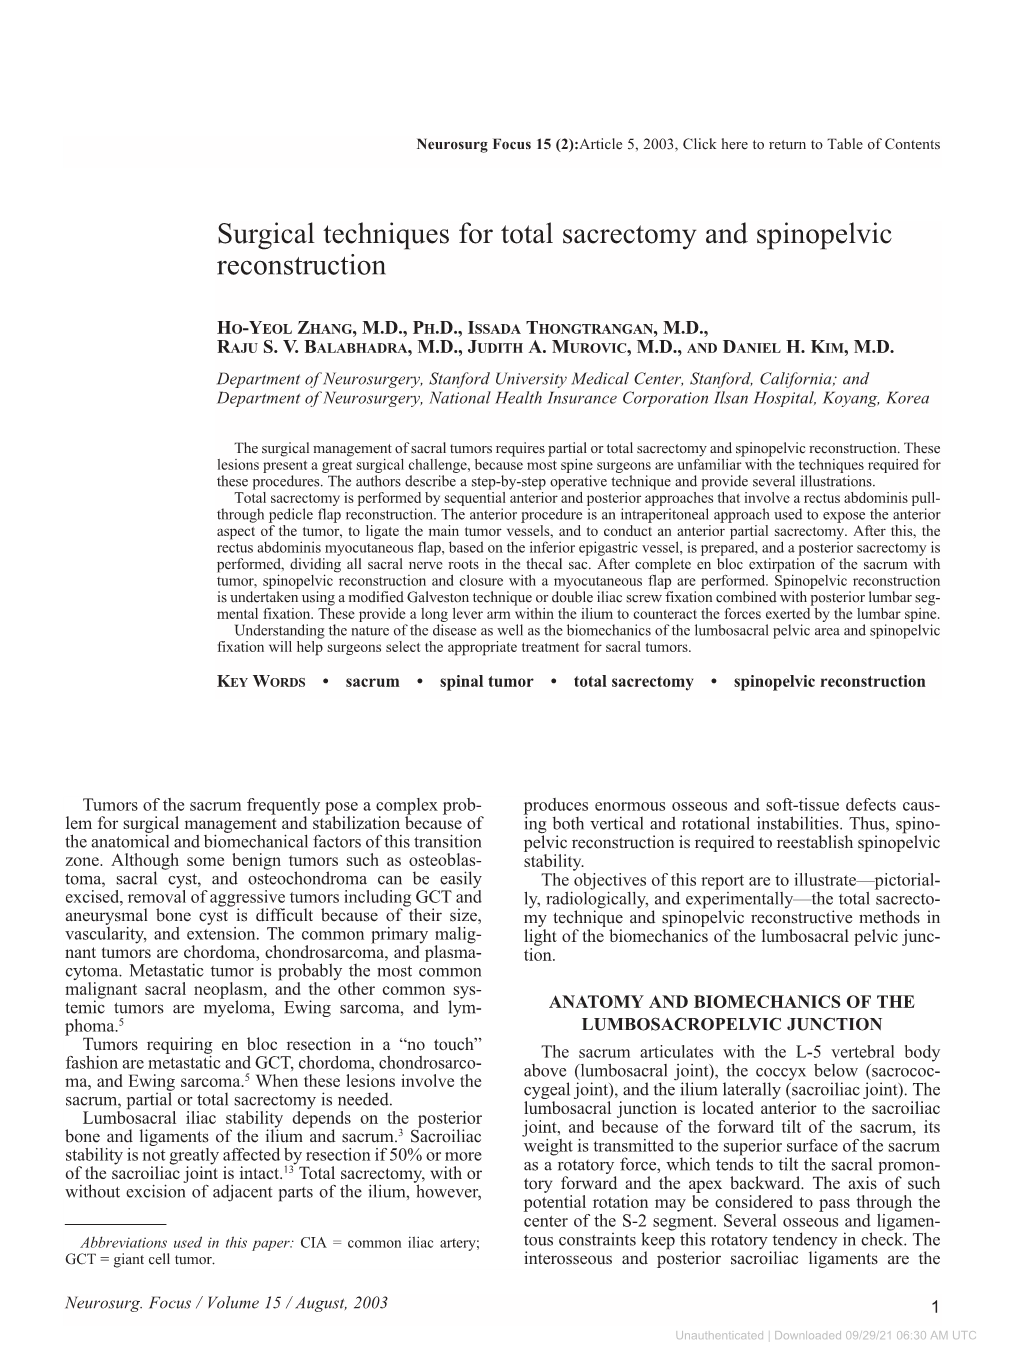 Surgical Techniques for Total Sacrectomy and Spinopelvic Reconstruction